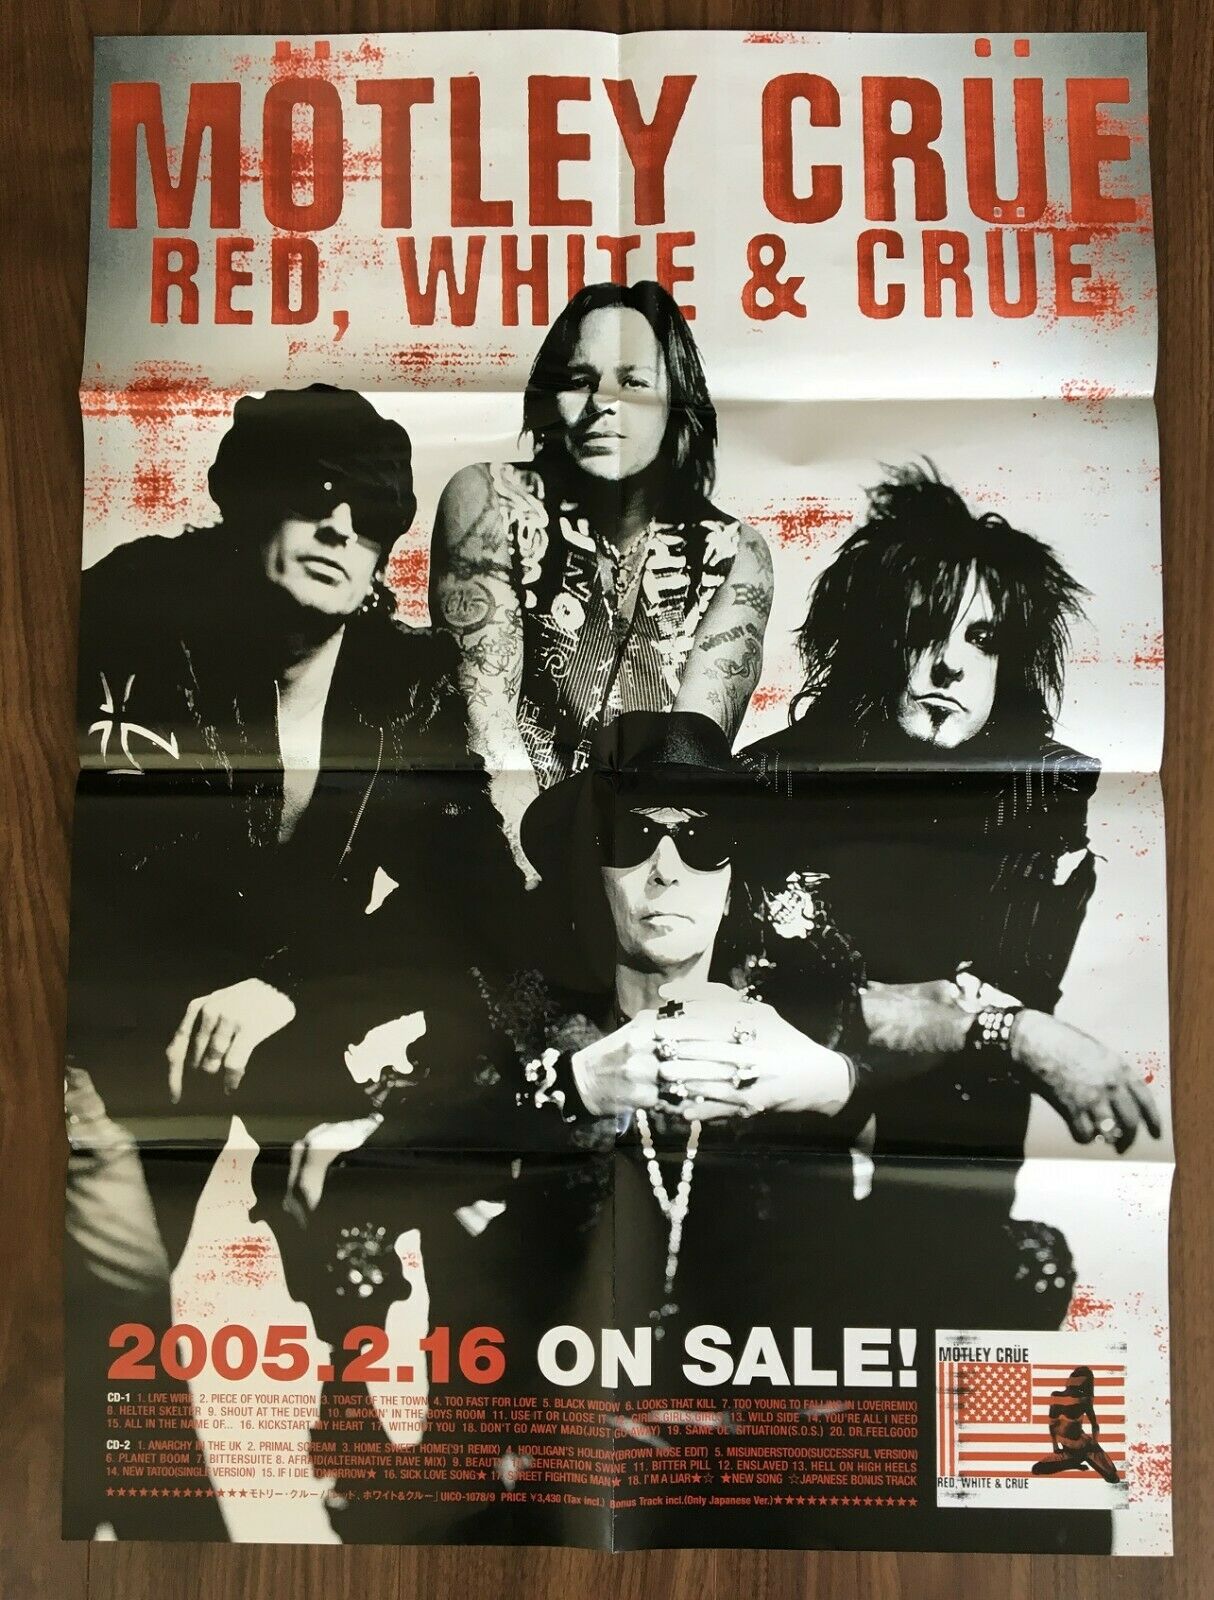 Motley Crue Official Japan Promo Only Poster Red White Crue More Listed $0 Ship